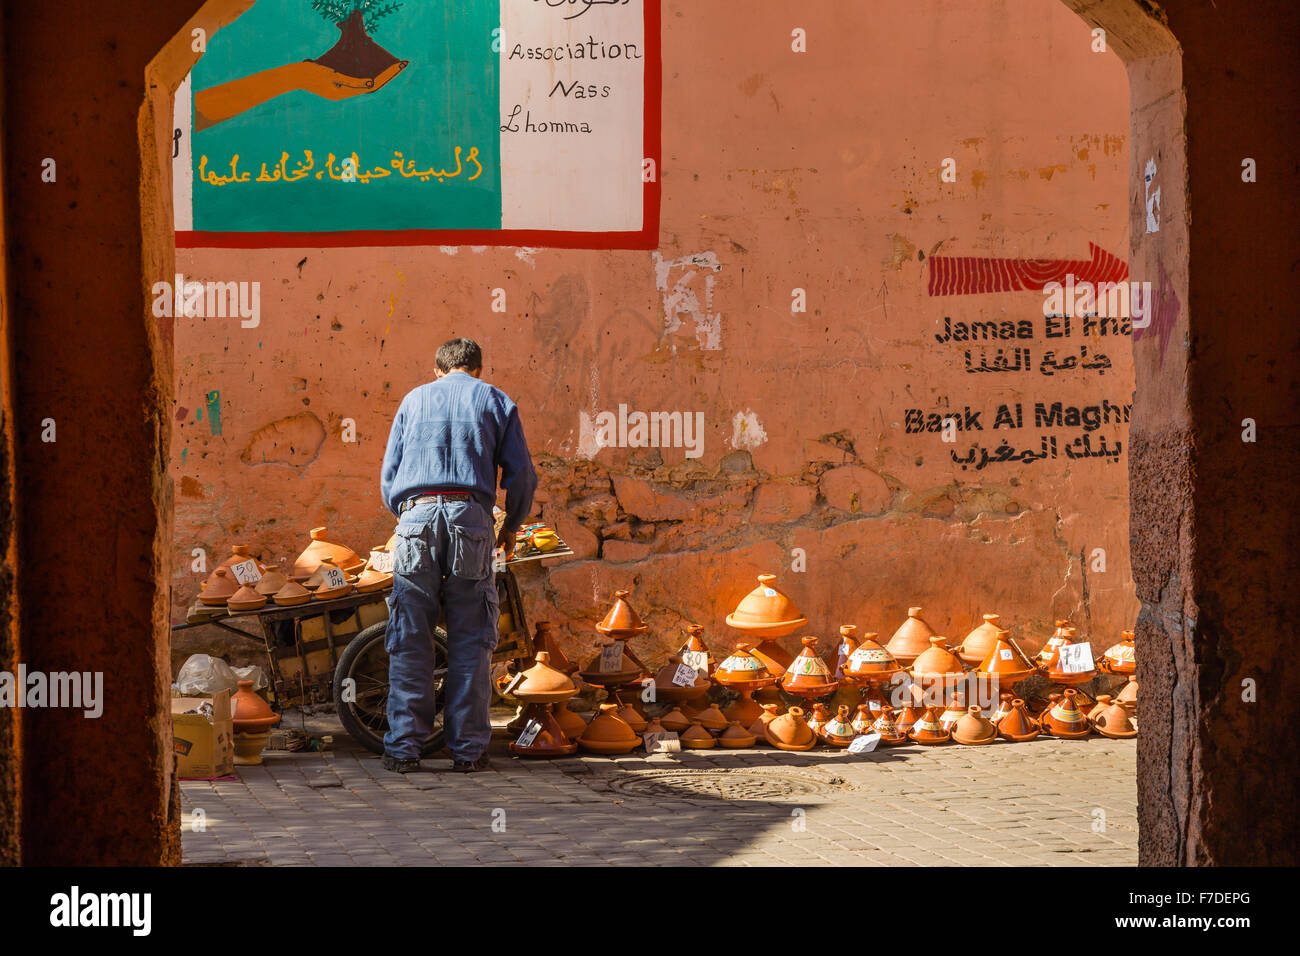 Potter and his tagine near the Jamaa el Fna Square in Marrakesh Stock Photo